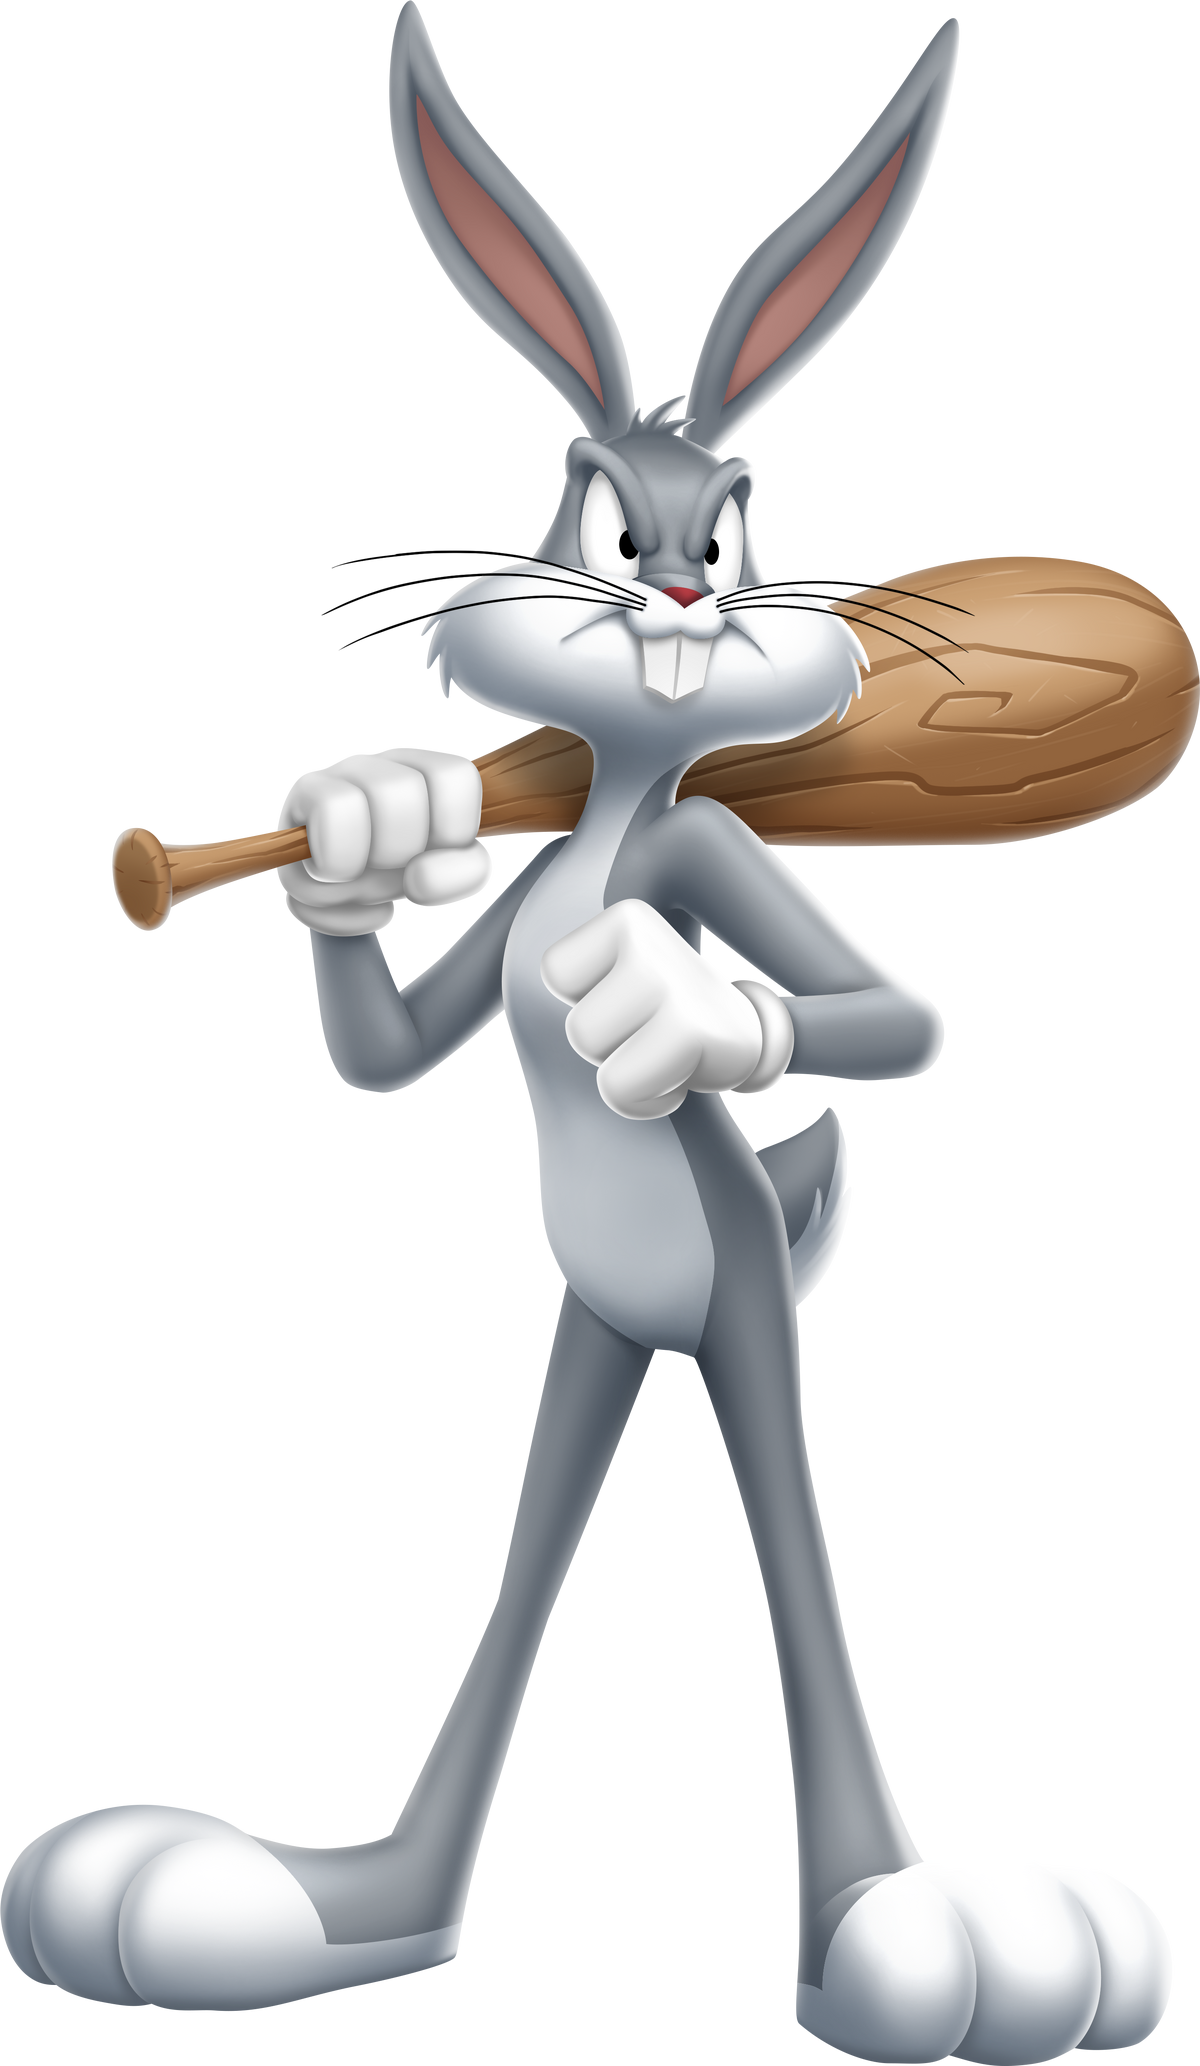 Bugs Bunny Is Back, and So Is the 'Looney Tunes' Mayhem - The New York Times